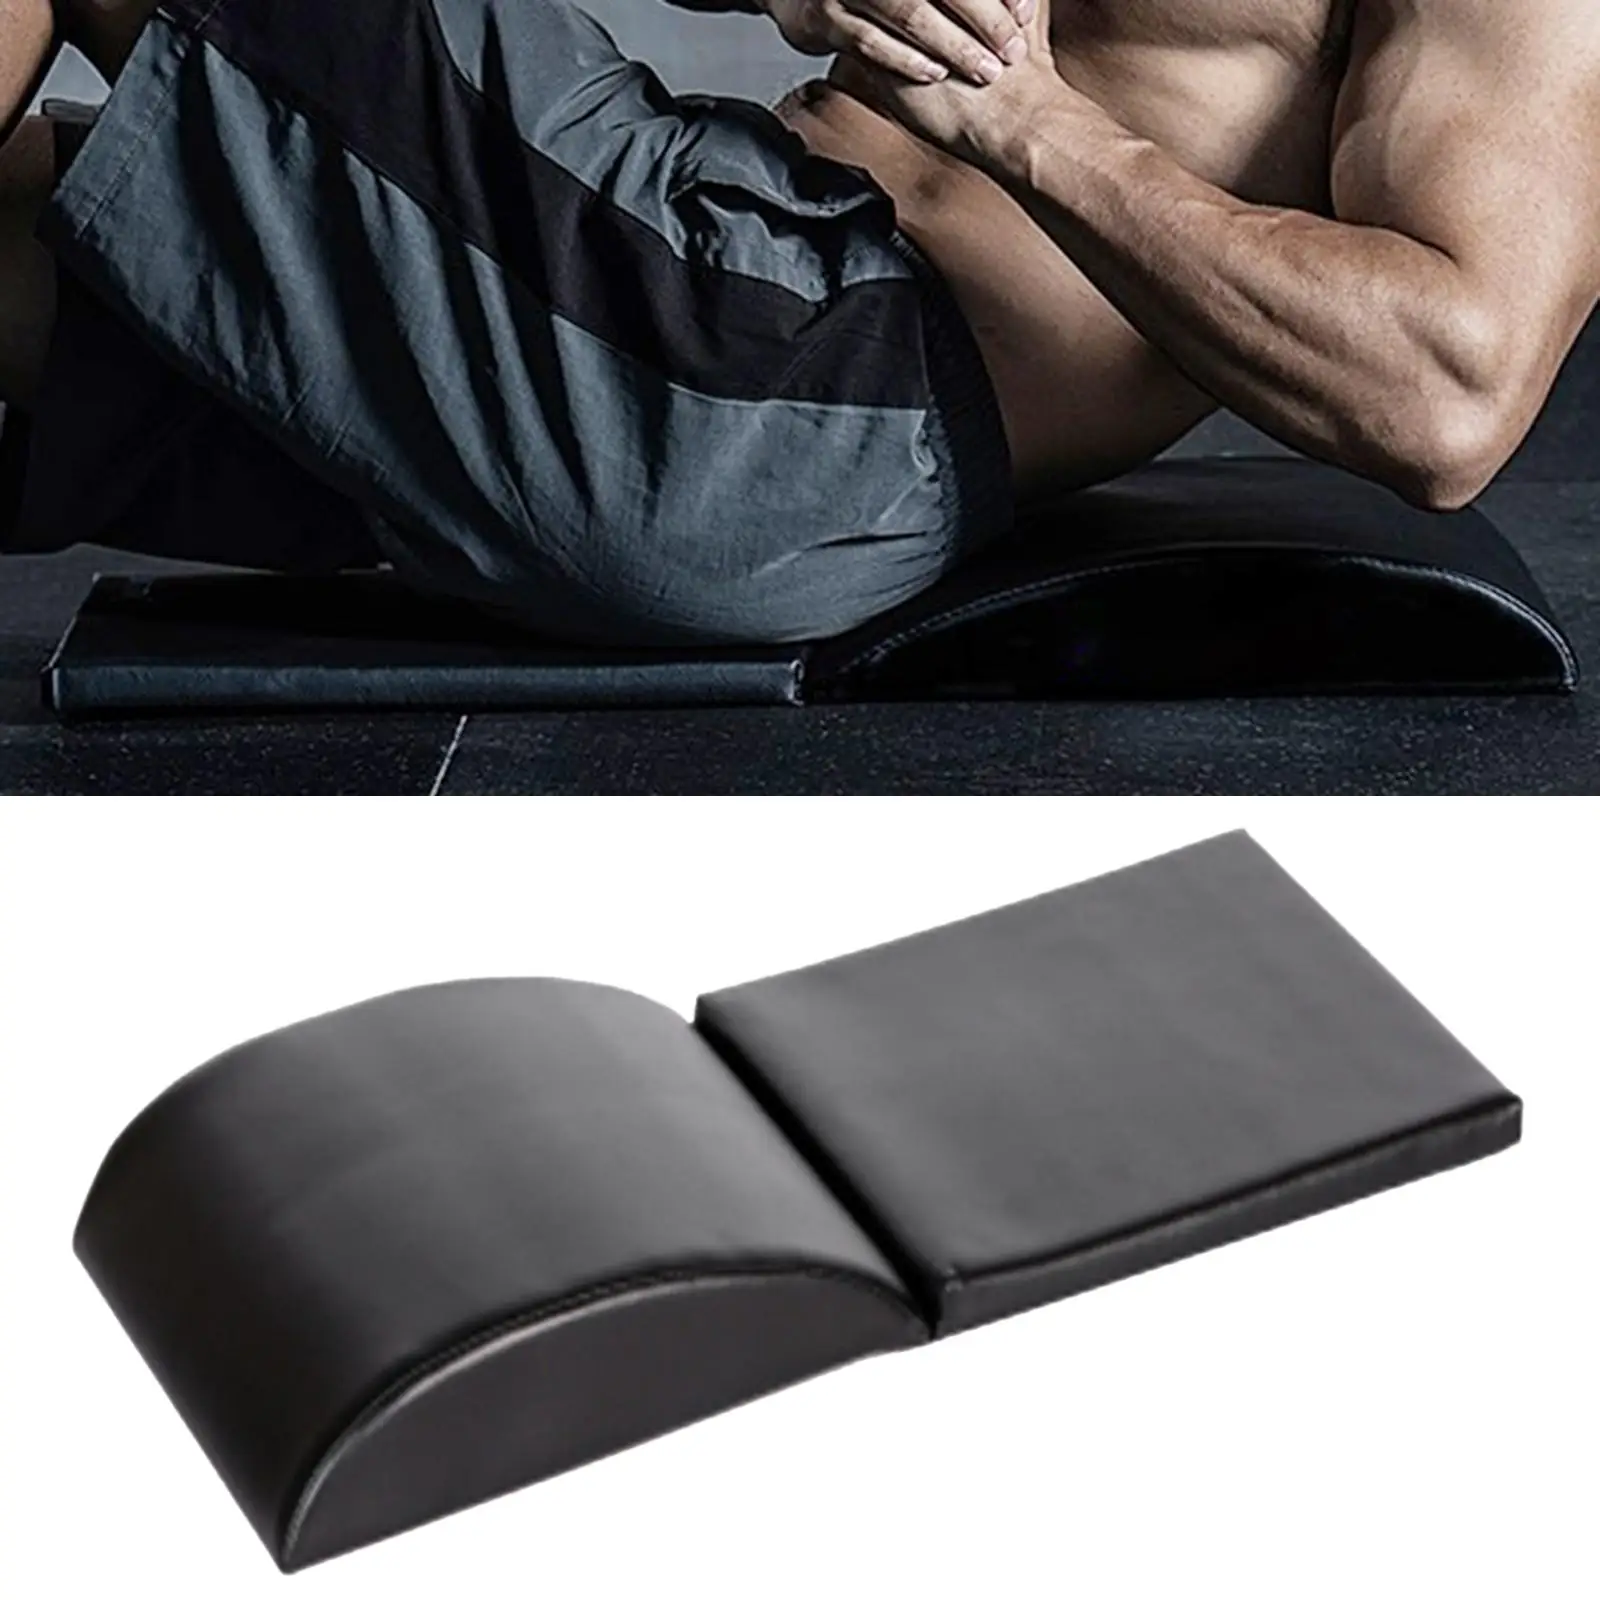 Ab Exercise Mat Abdominal Core Trainer Workout Tailbone Protector Cushion